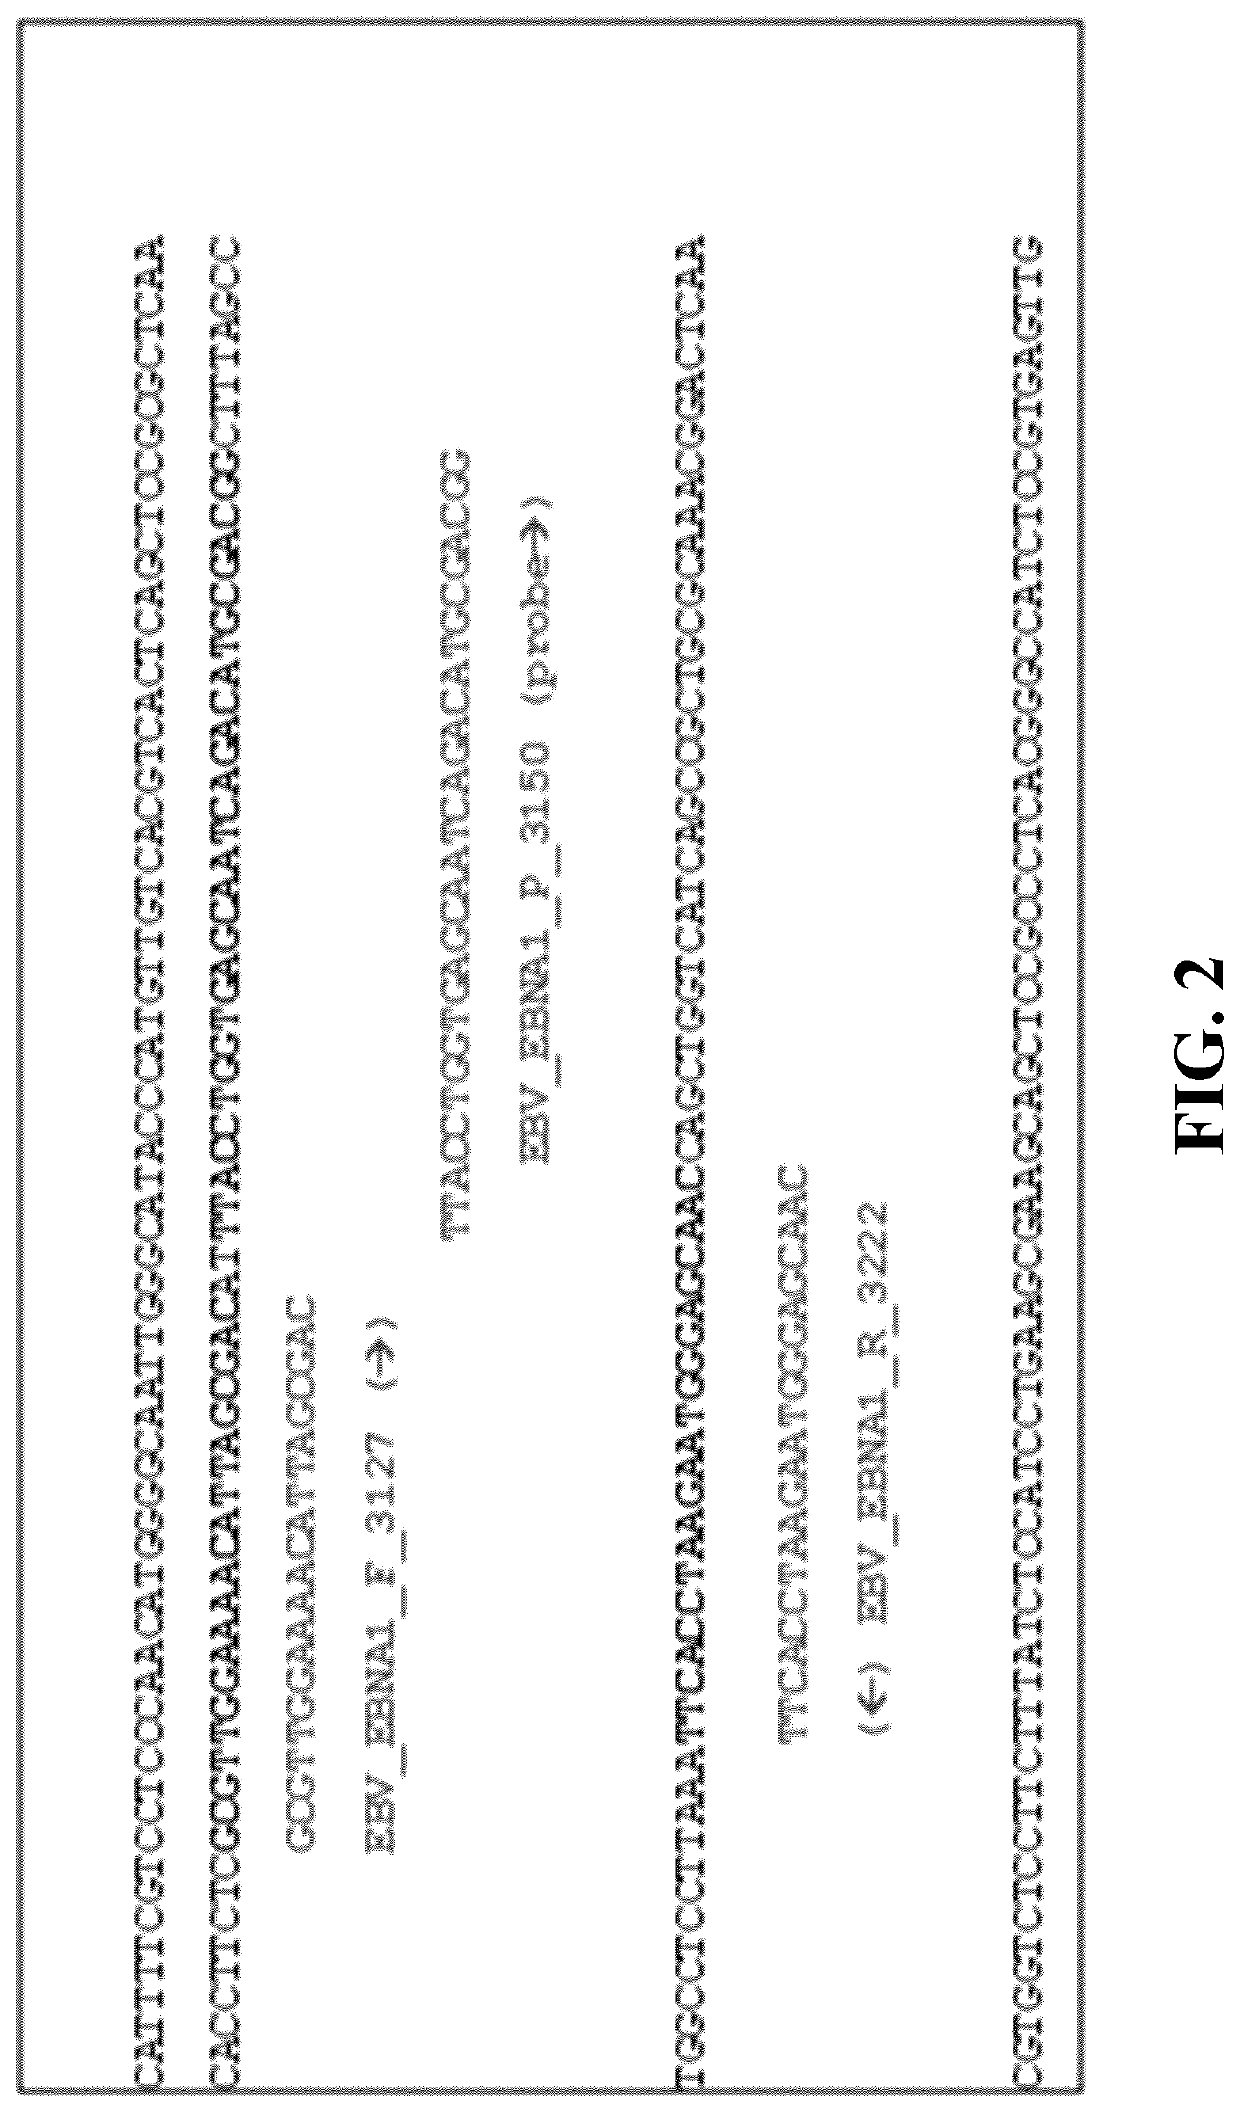 Compositions and methods for detection of epstein barr virus (EBV)